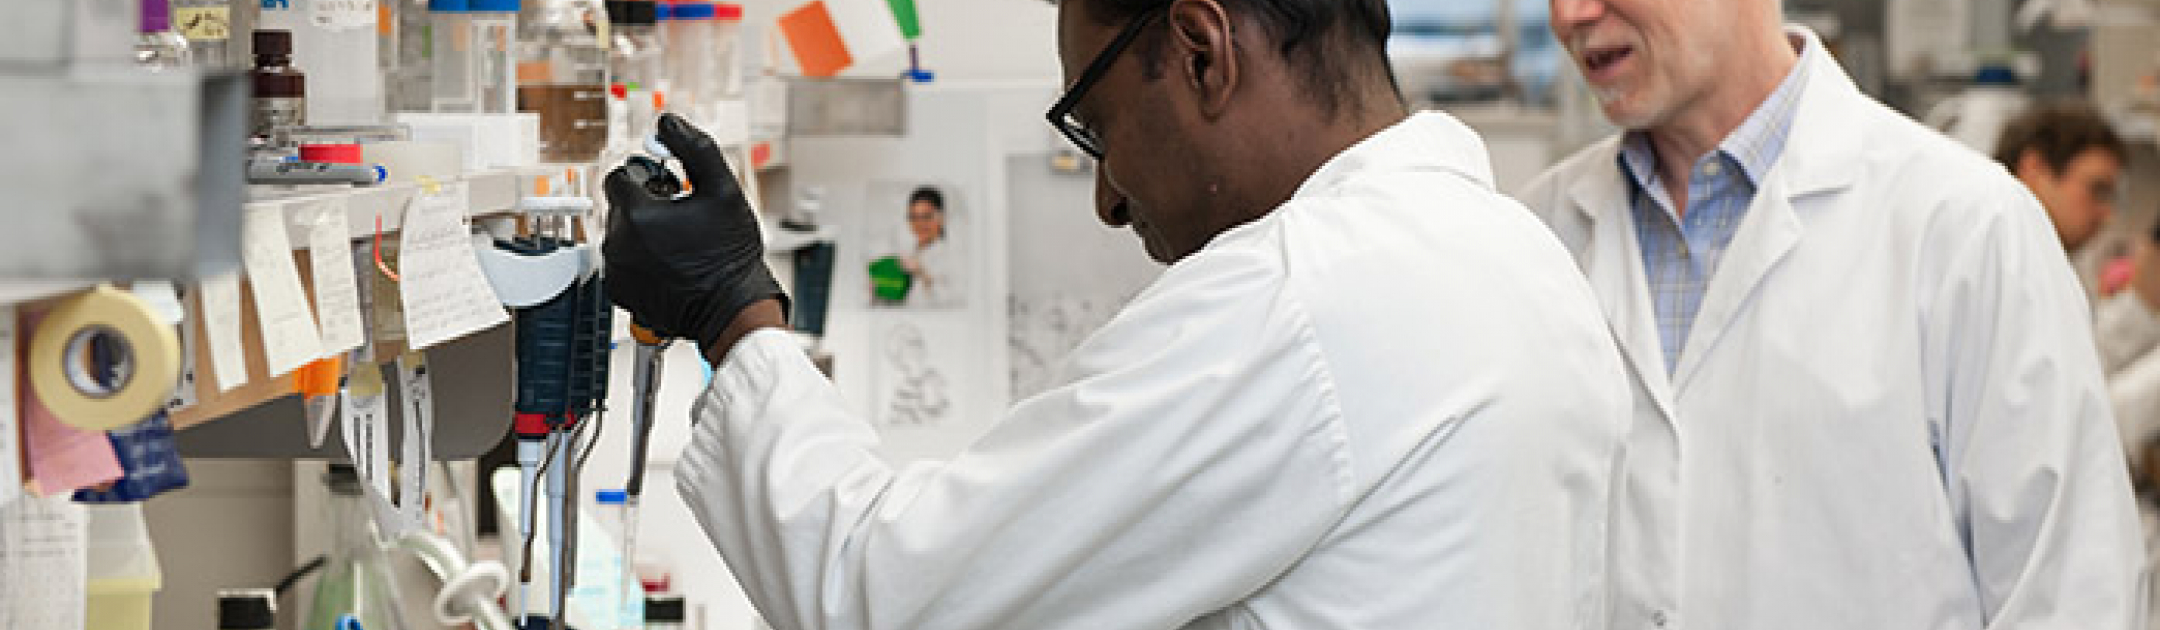 Two researchers working in a lab